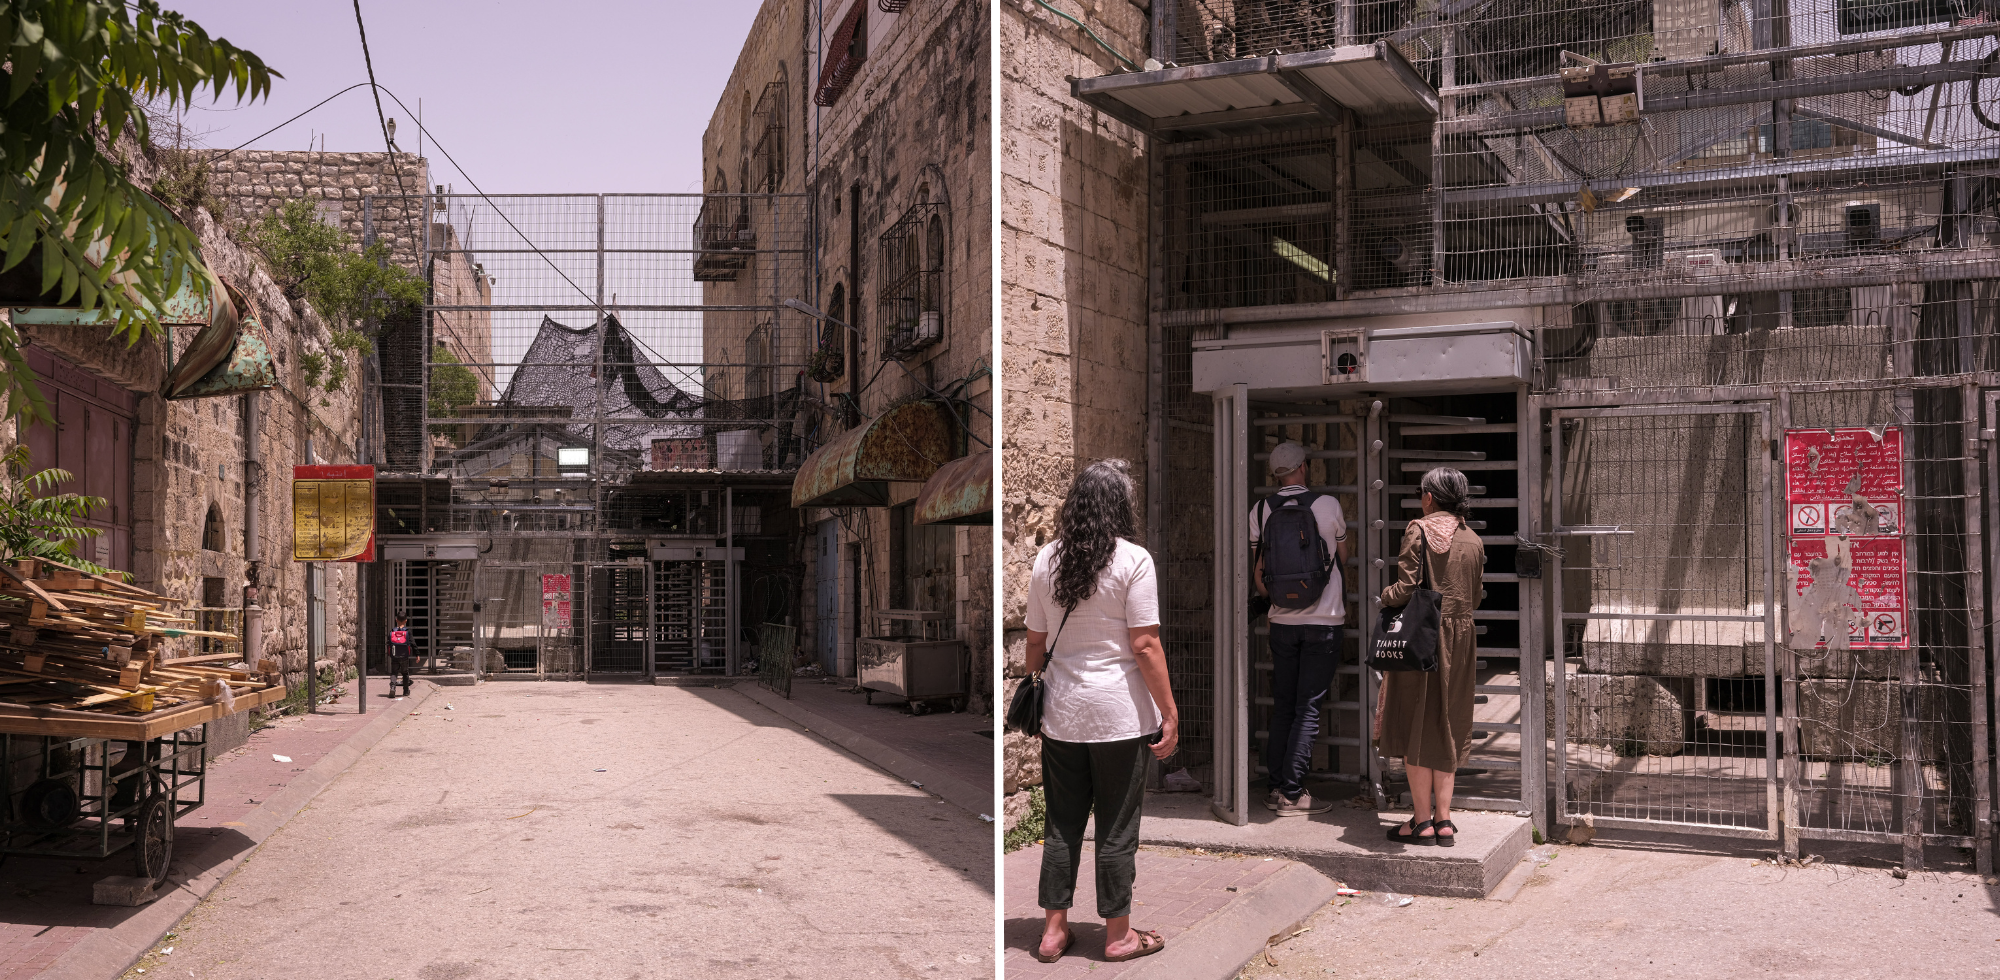 Shuhada Street checkpoint in Hebron, where the AI-controlled gun locks on targets remotely and is capable of shooting stun grenades and tear gas.